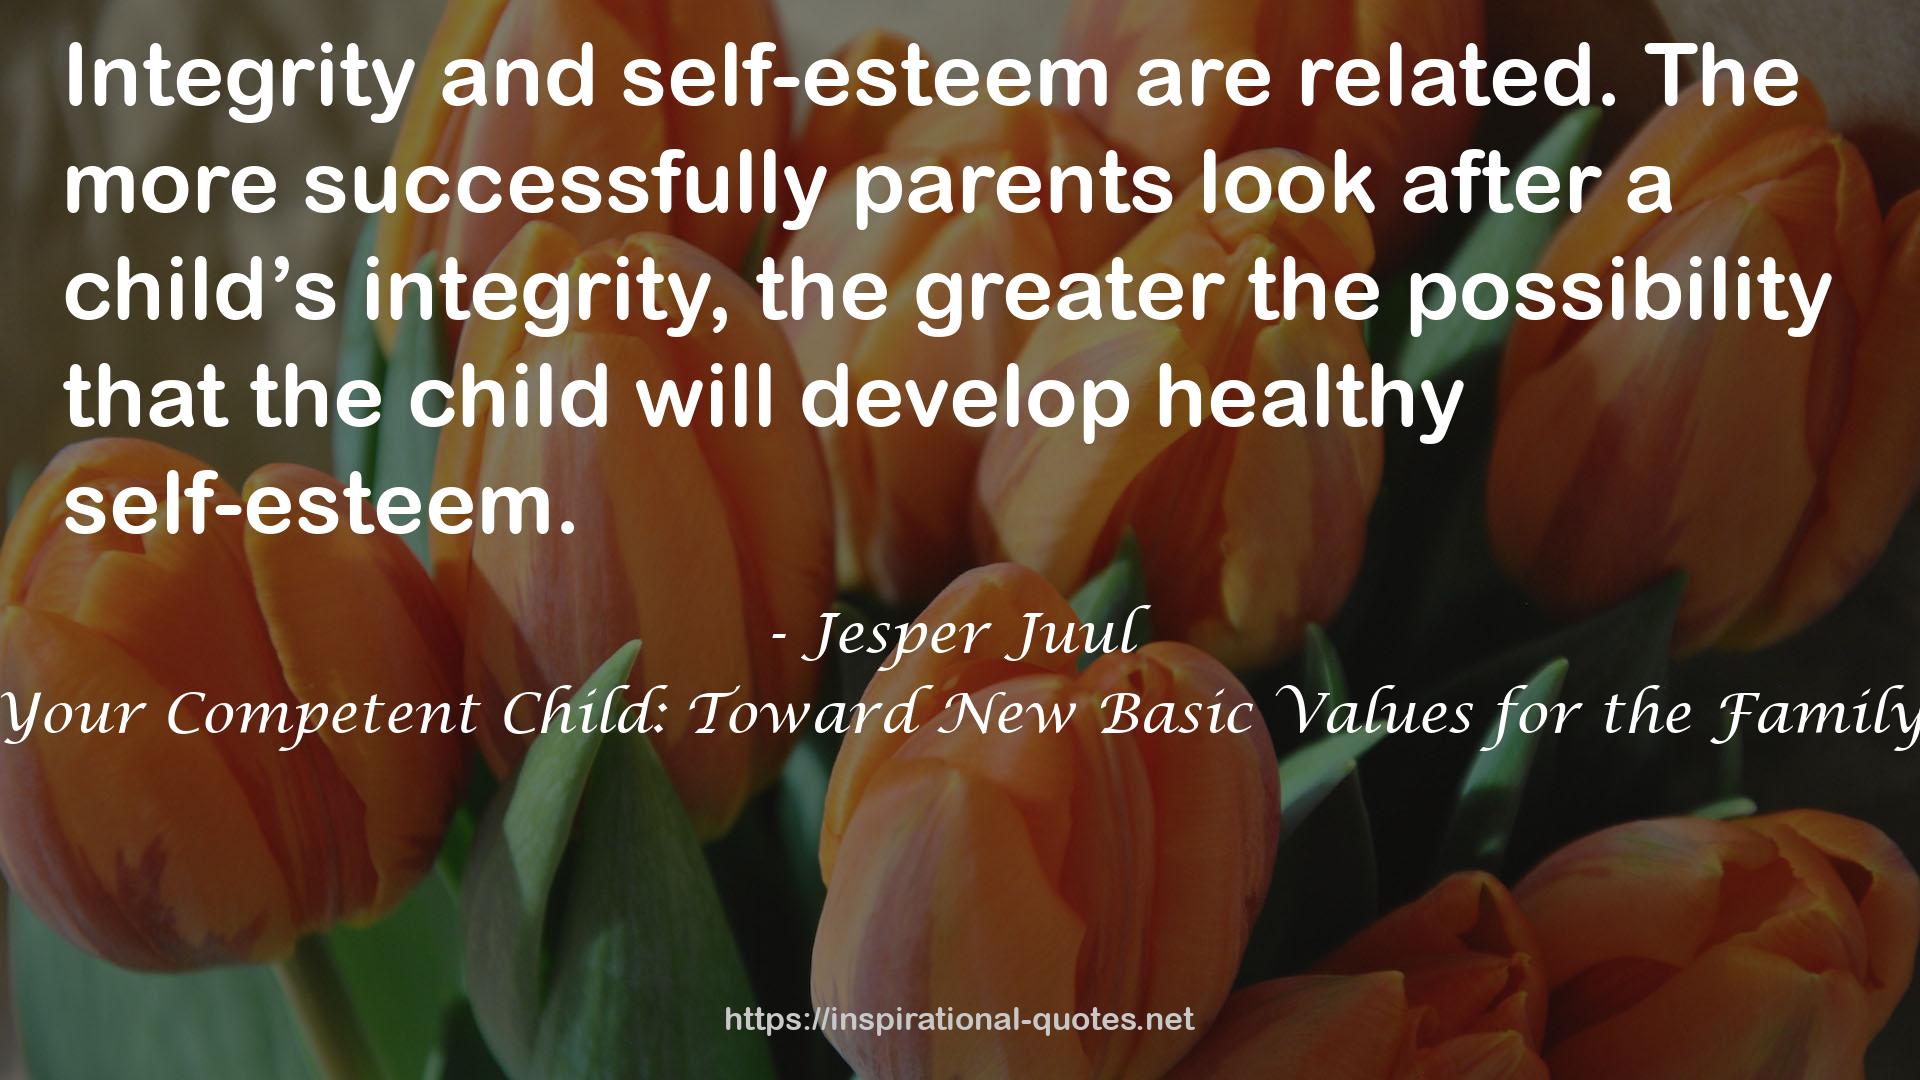 Your Competent Child: Toward New Basic Values for the Family QUOTES